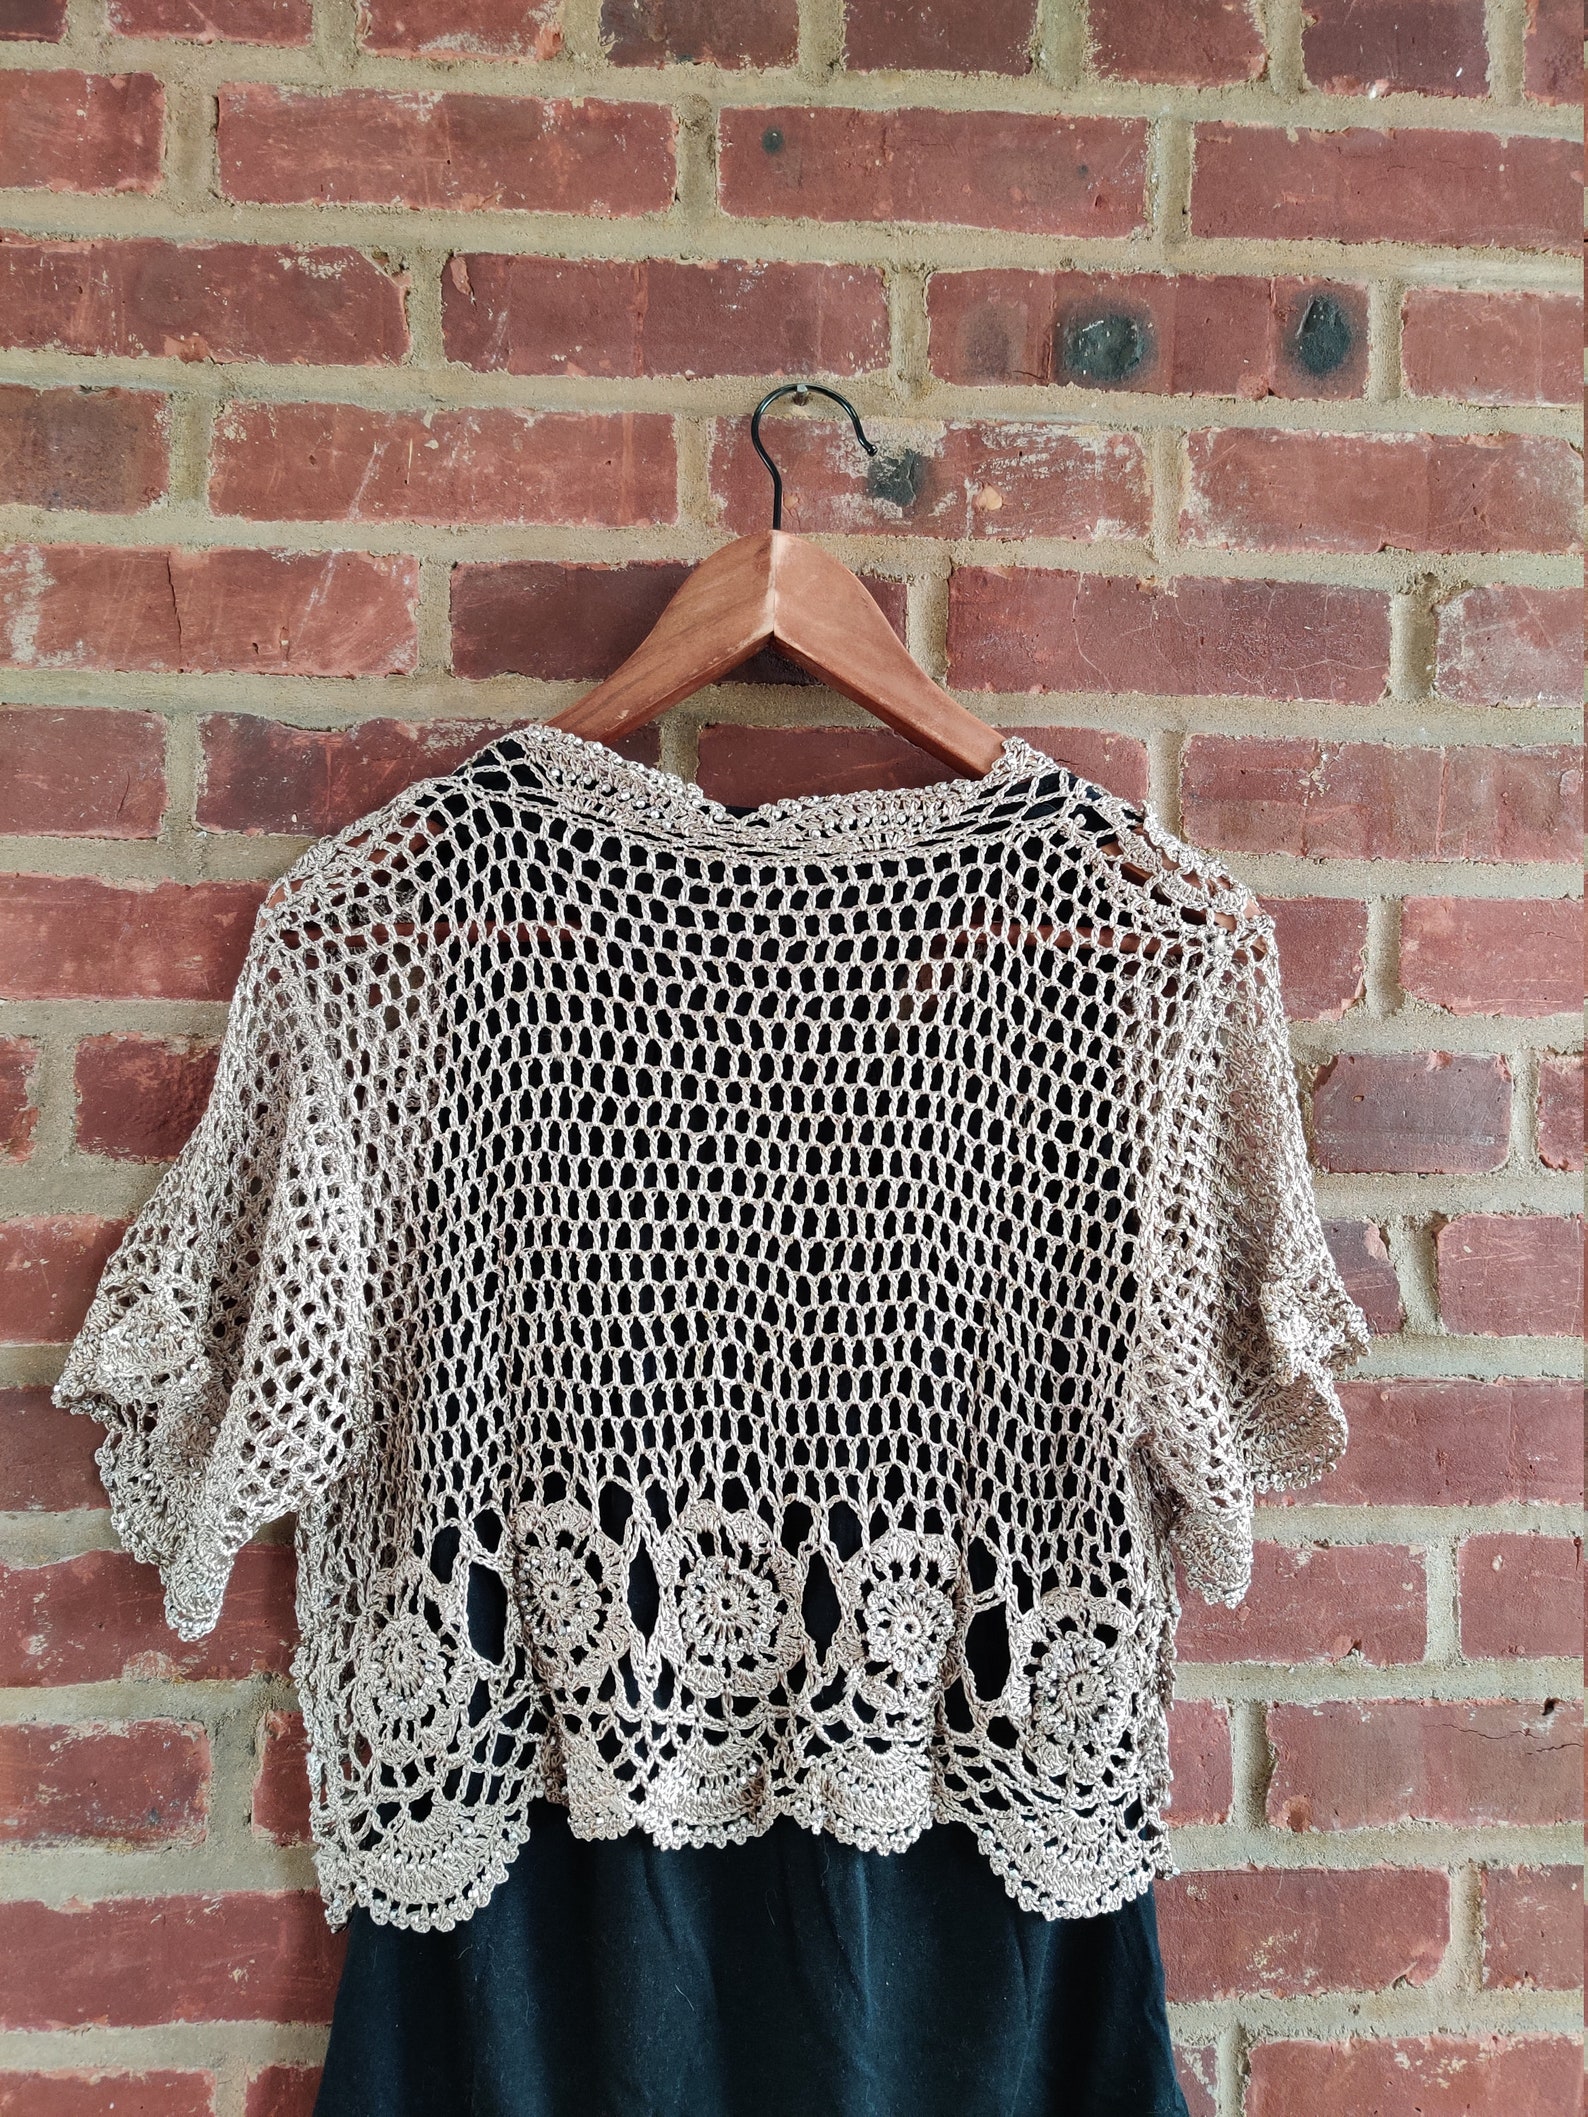 Handmade Crochet Lace Shawl Poncho One Size Light Brown Color - Etsy